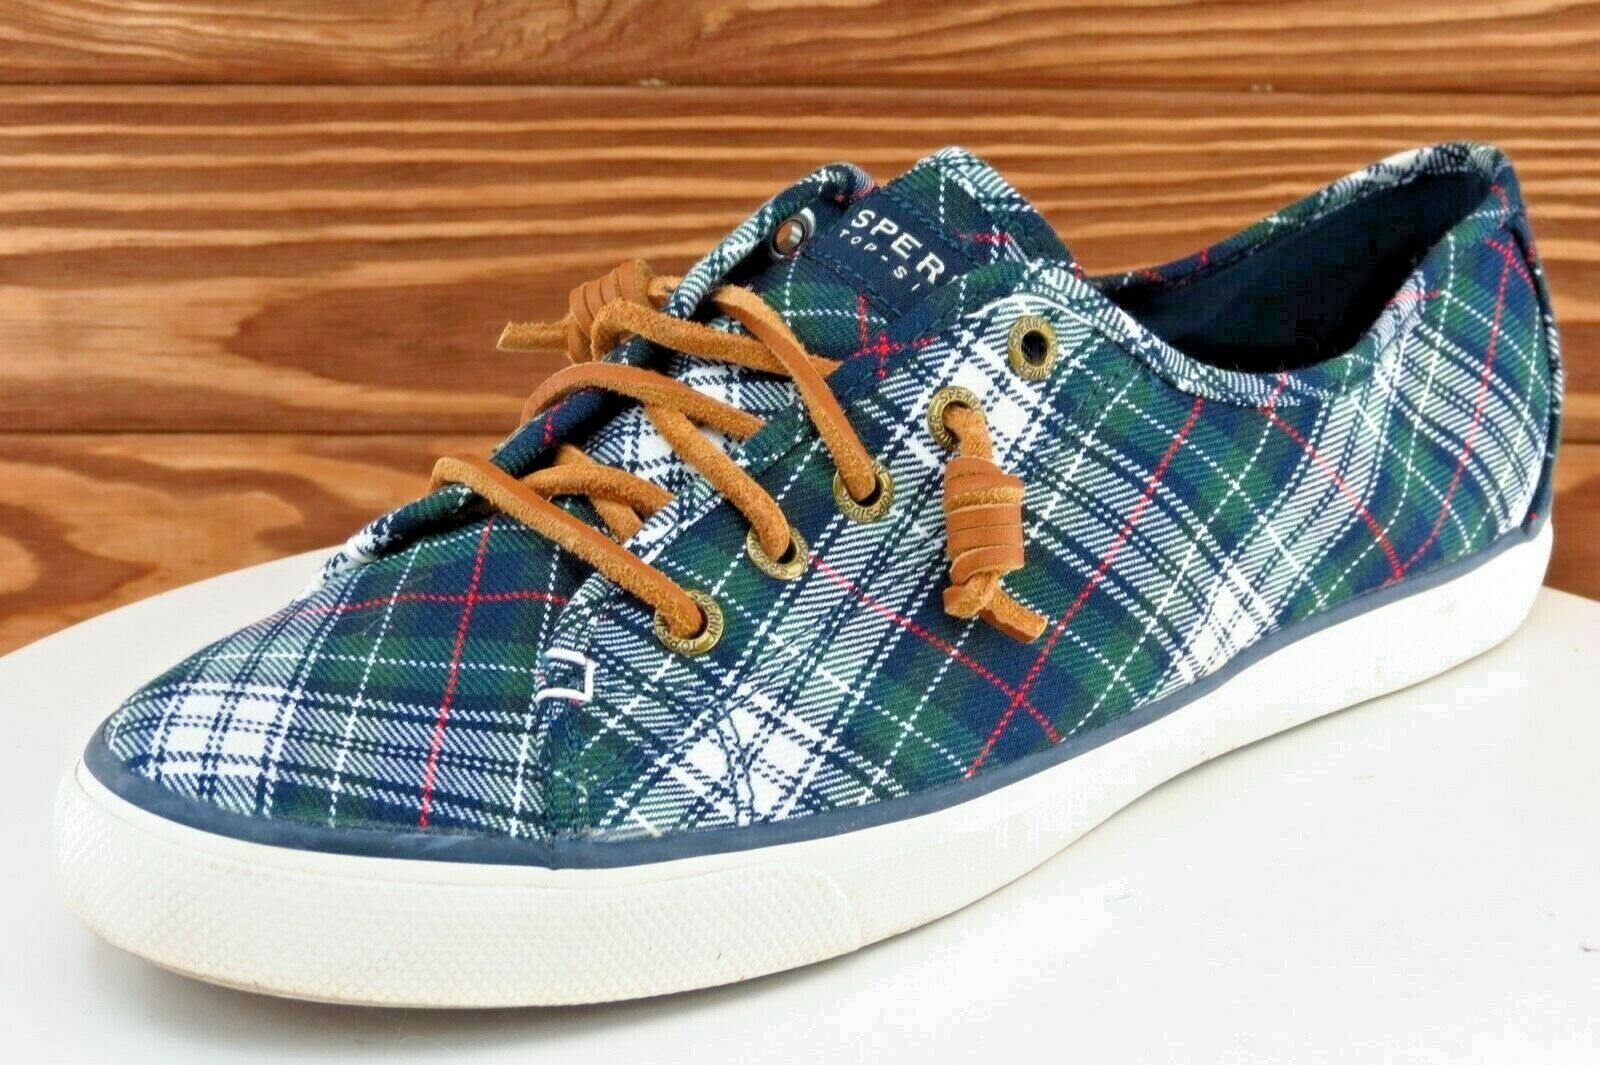 Sperry Top-Sider Shoes Size 12 M Green Fashion Sneakers Fabric Wmn 92940